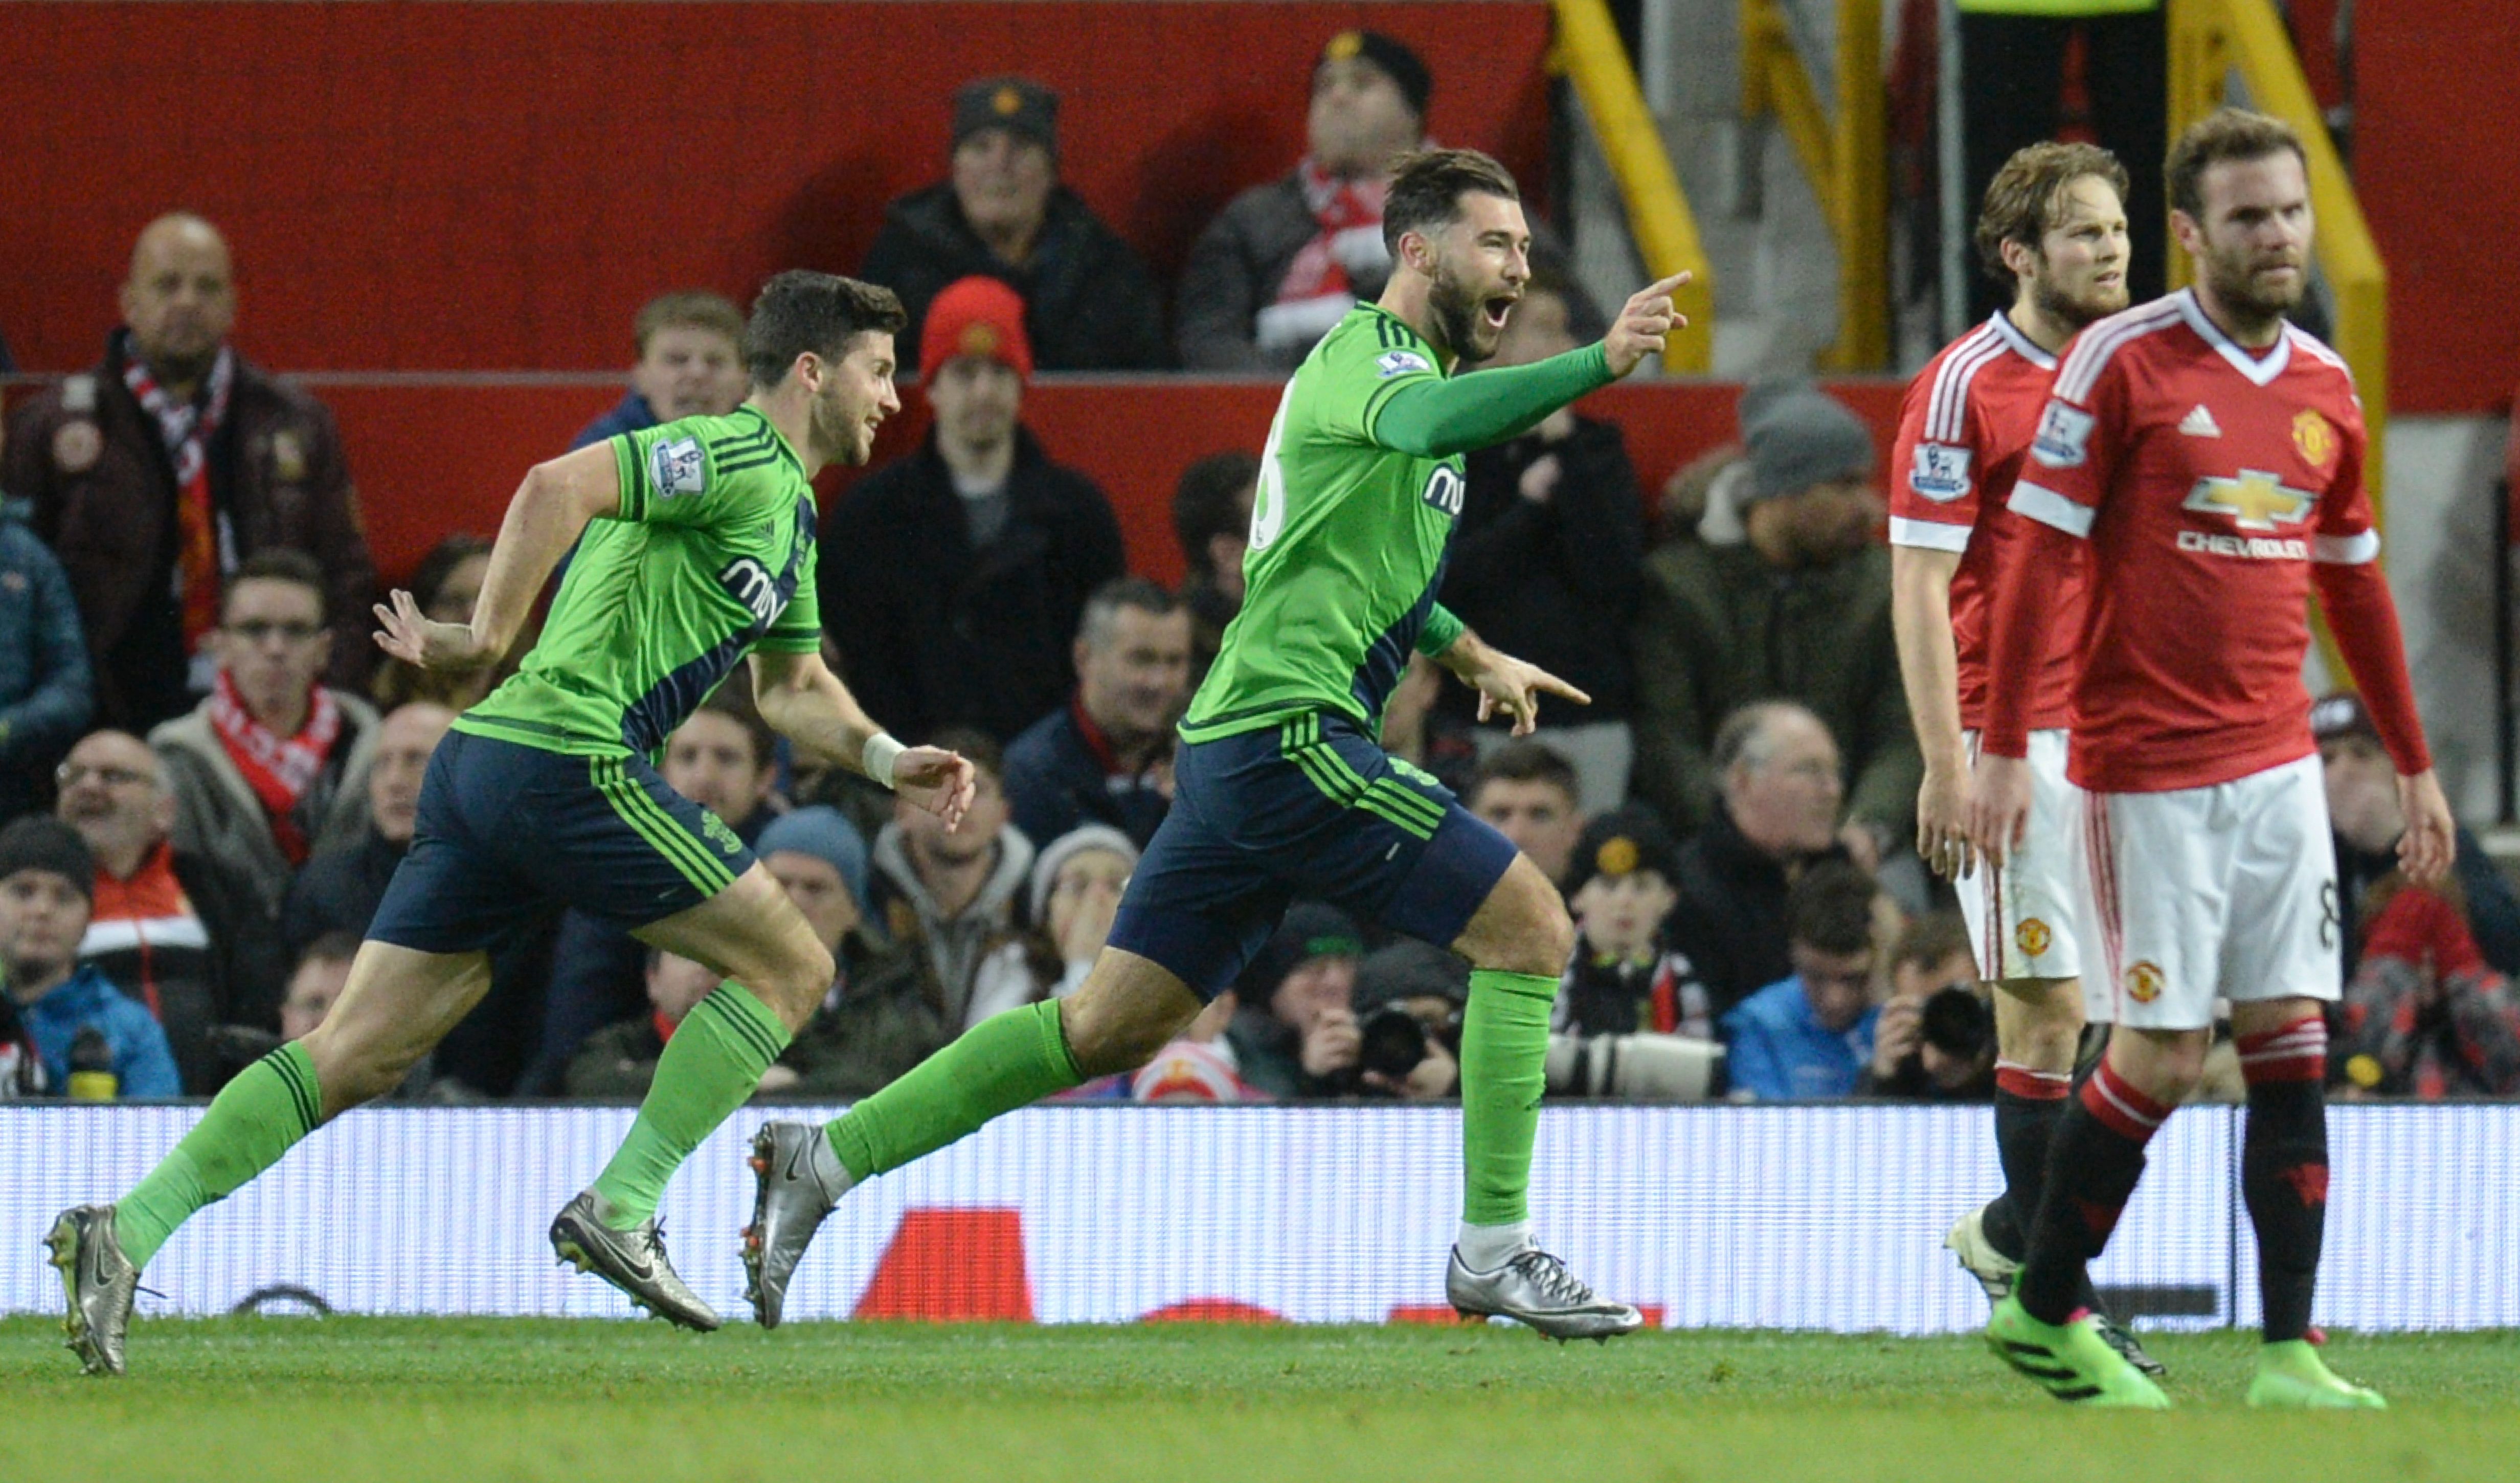 Southampton's English striker Charlie Austin (C) celebrates scoring the opening goal during the English Premier League football match between Manchester United and Southampton at Old Trafford in Manchester, north west England, on January 23, 2016. AFP PHOTO / OLI SCARFF

RESTRICTED TO EDITORIAL USE. No use with unauthorized audio, video, data, fixture lists, club/league logos or 'live' services. Online in-match use limited to 75 images, no video emulation. No use in betting, games or single club/league/player publications. / AFP / OLI SCARFF        (Photo credit should read OLI SCARFF/AFP/Getty Images)